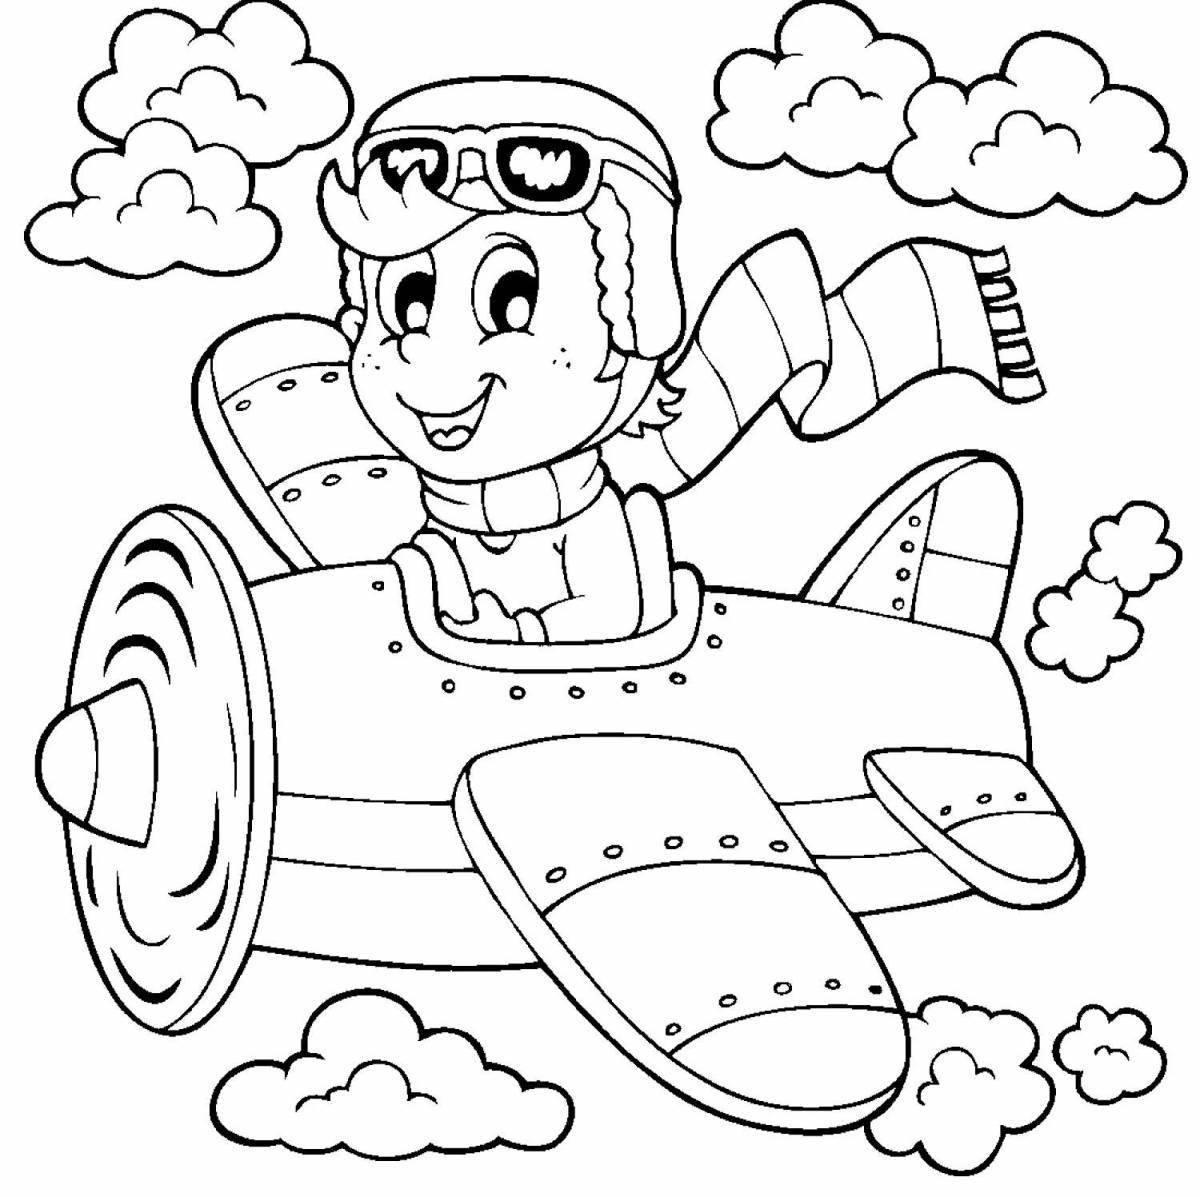 Coloring book brave military pilot for kids